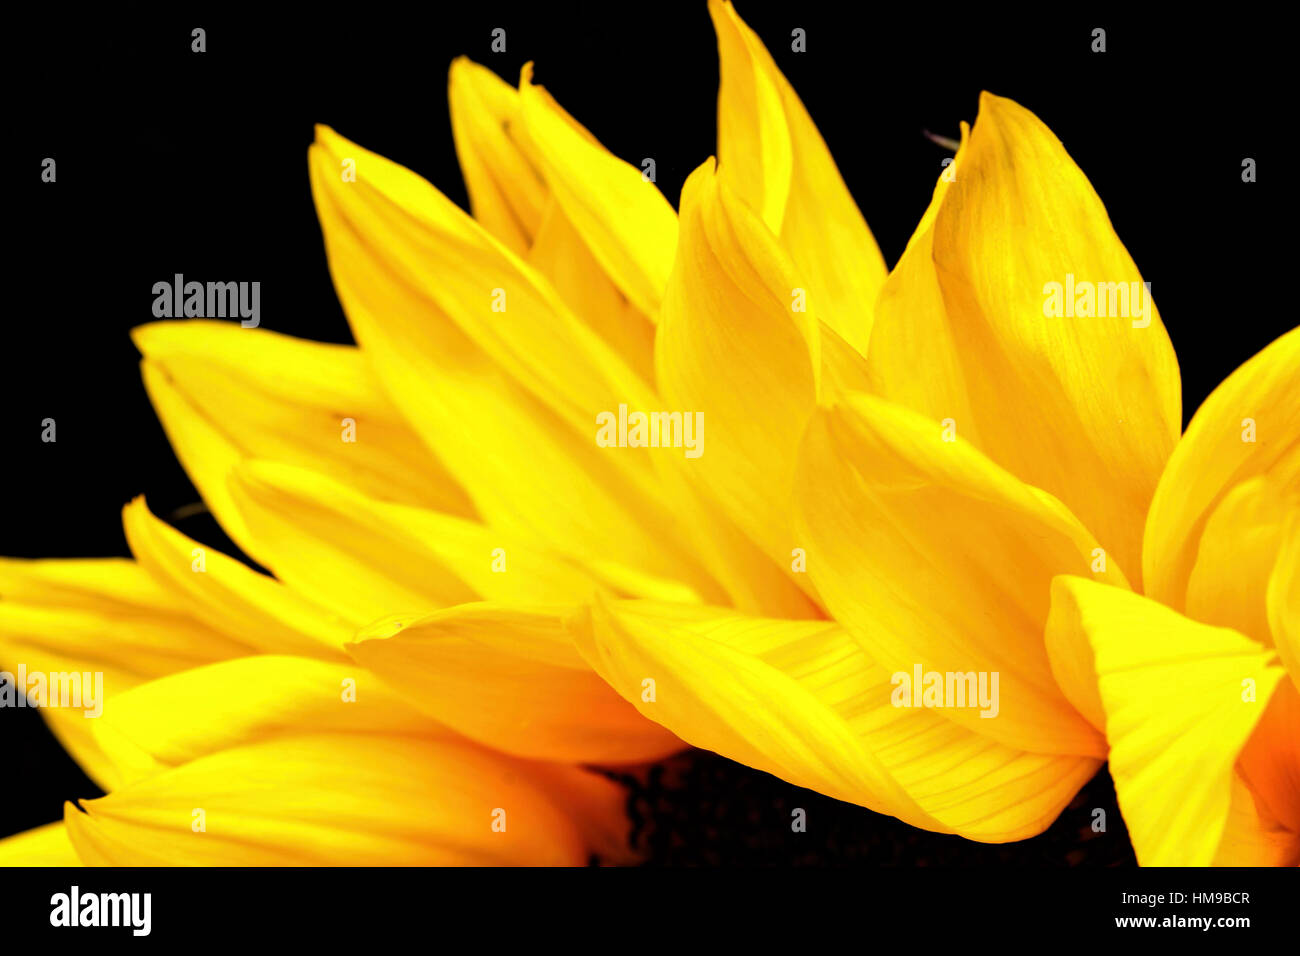 bright yellow sunflower close up wi a black background Stock Photo